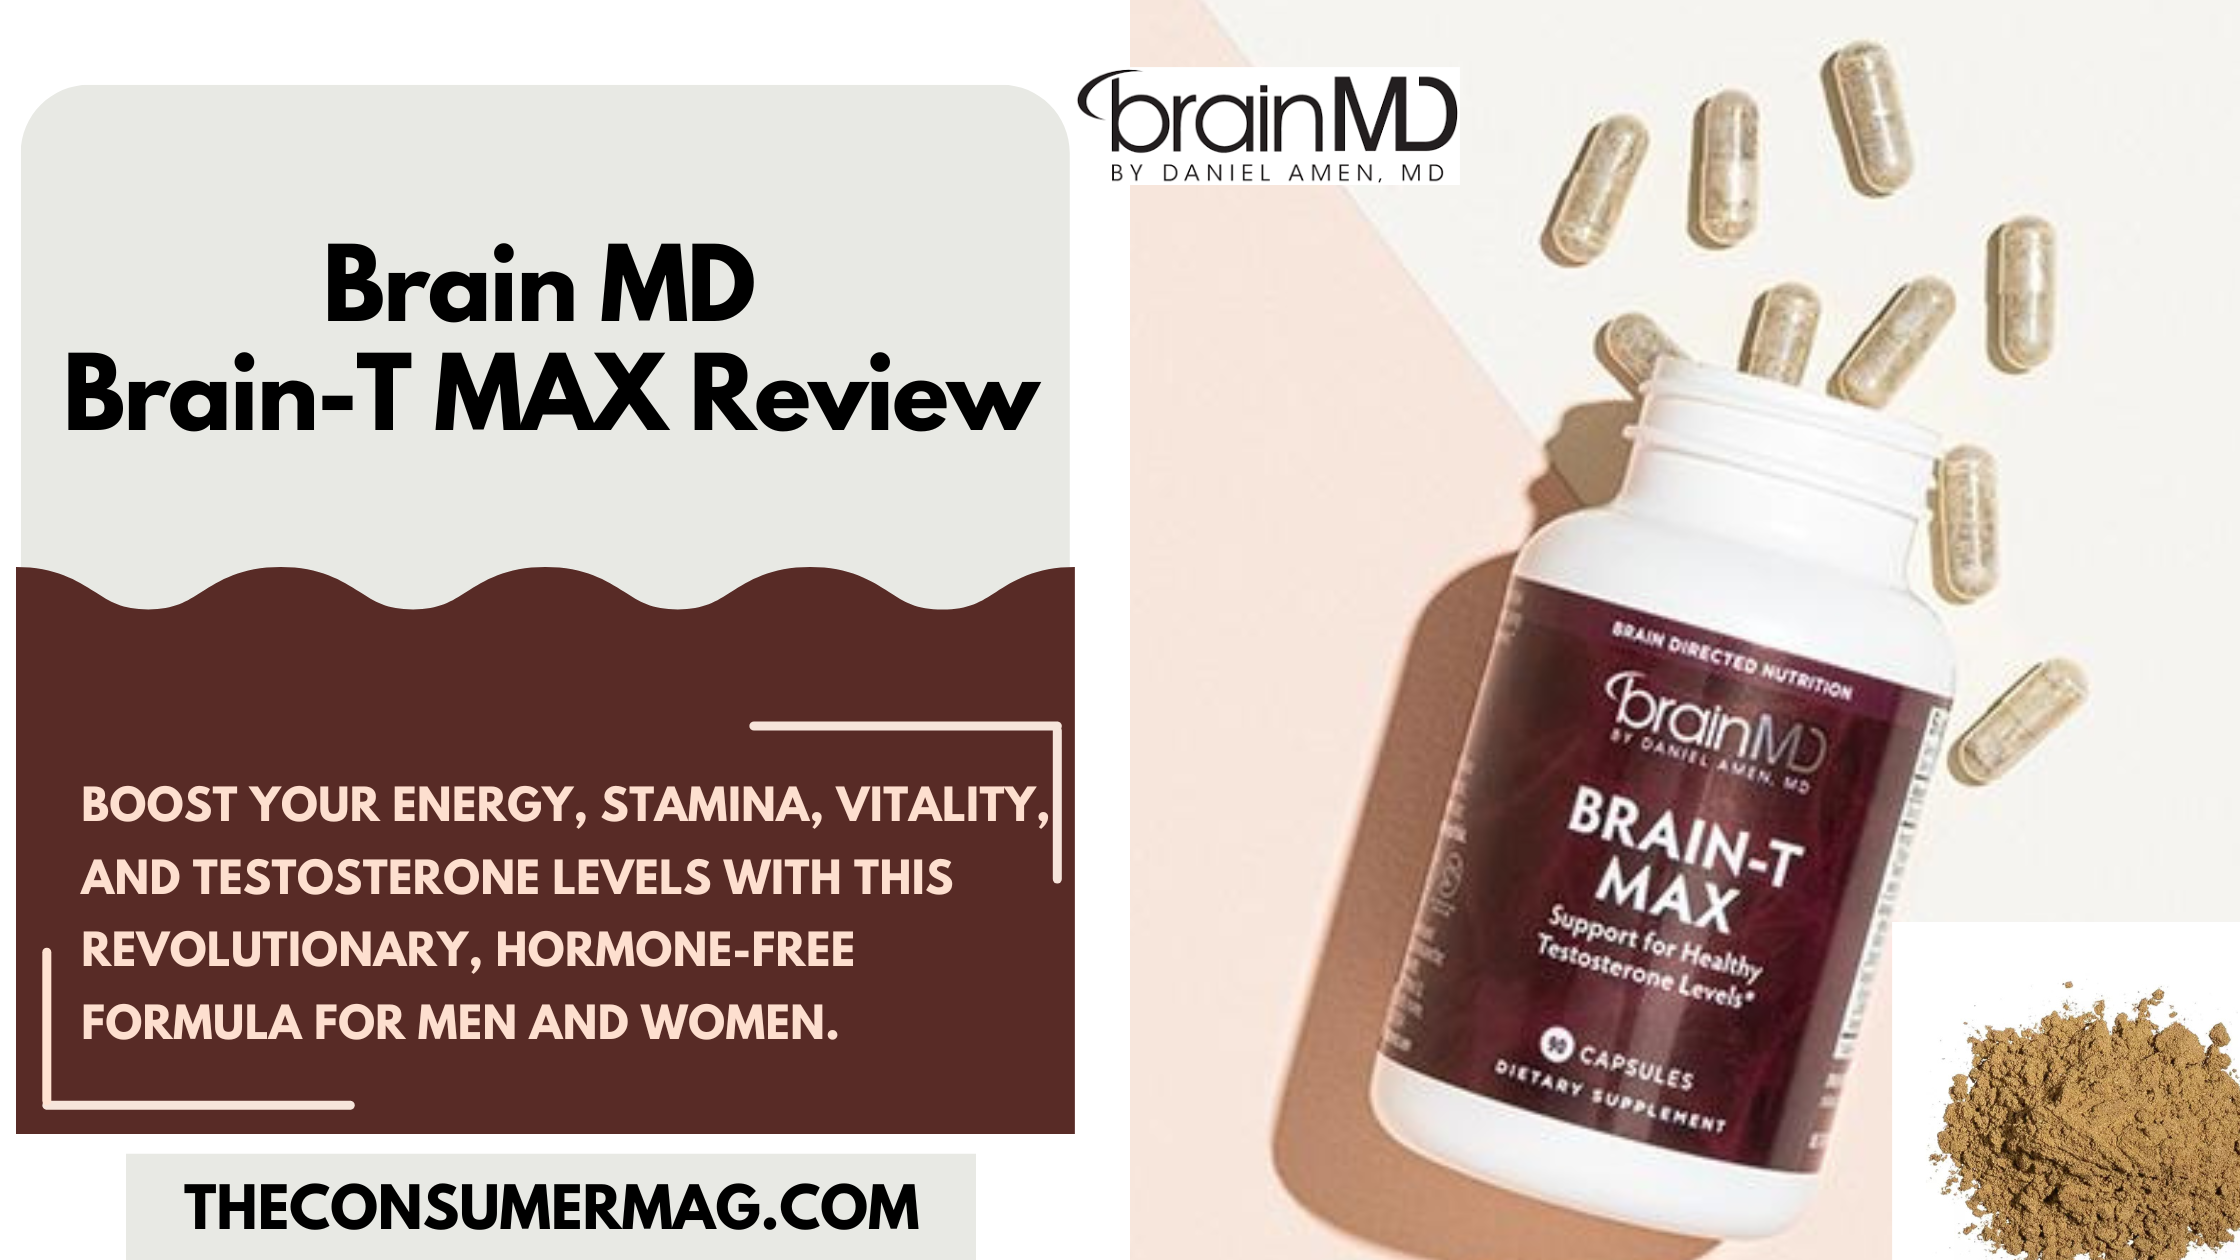 Brain-T MAX featured image